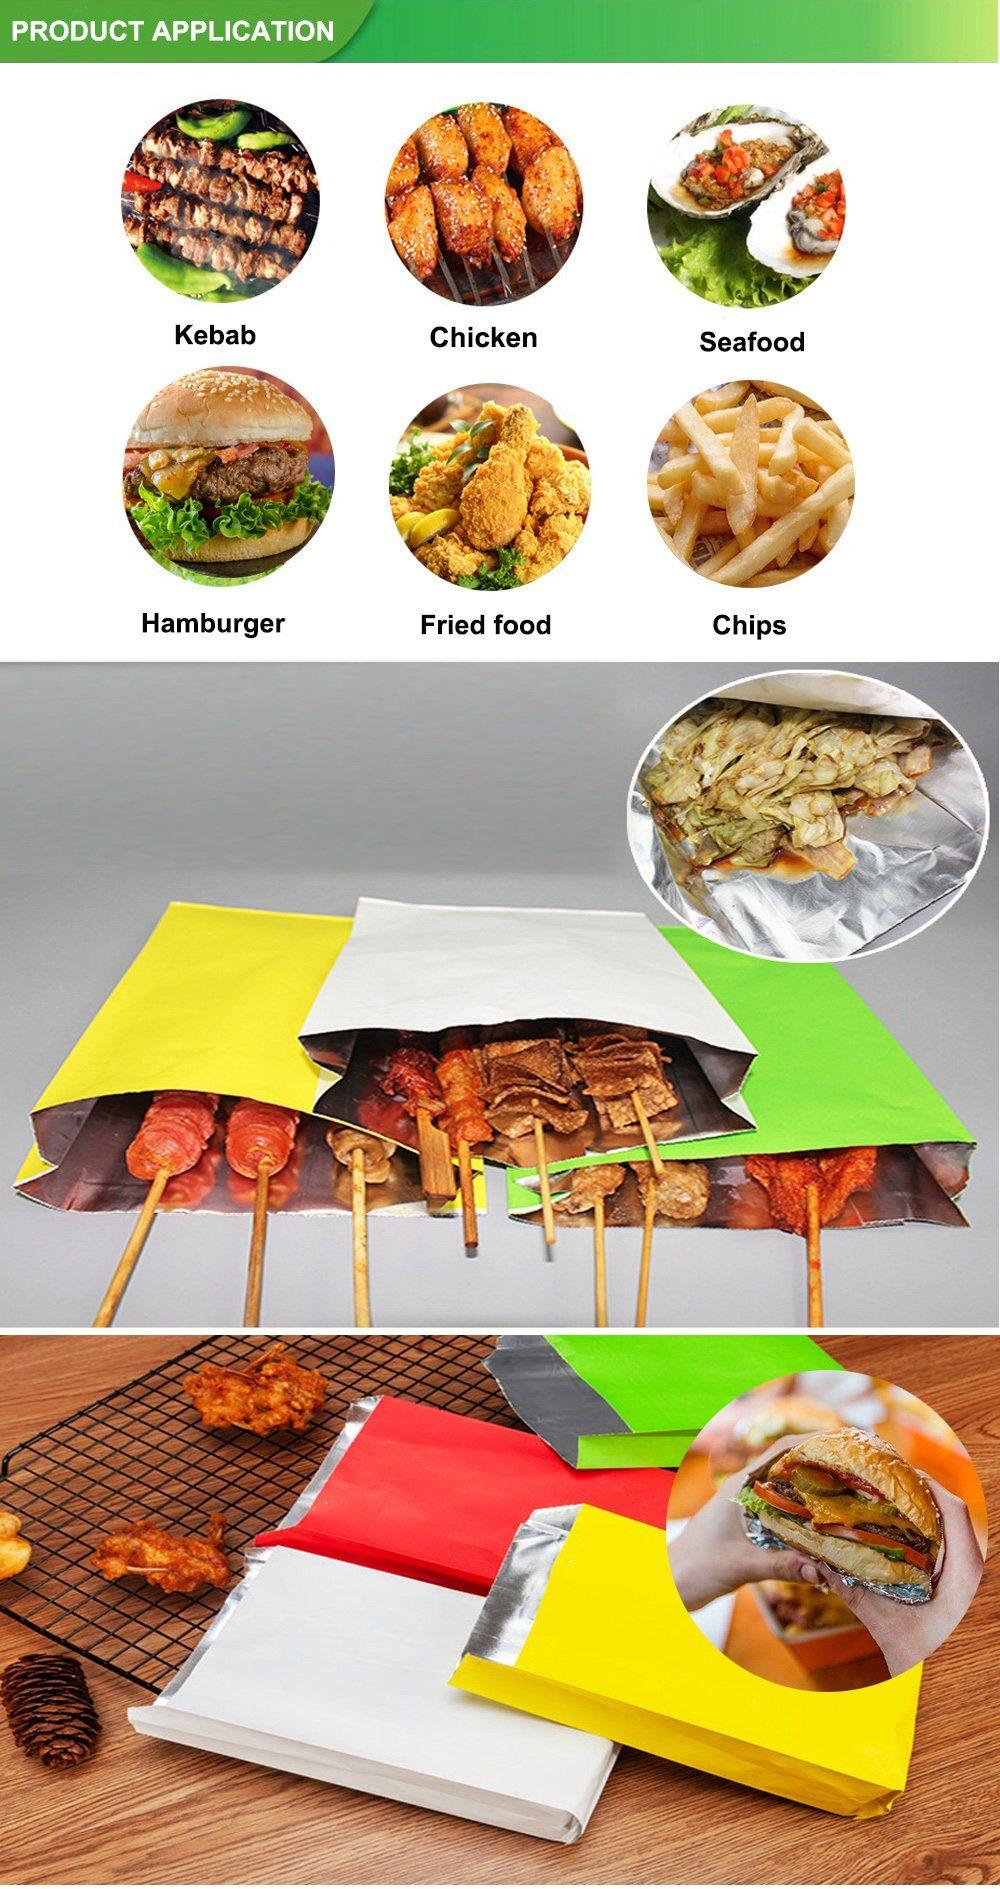 Foil Burger French Fries Double Bags Paper Fried Chicken Bag